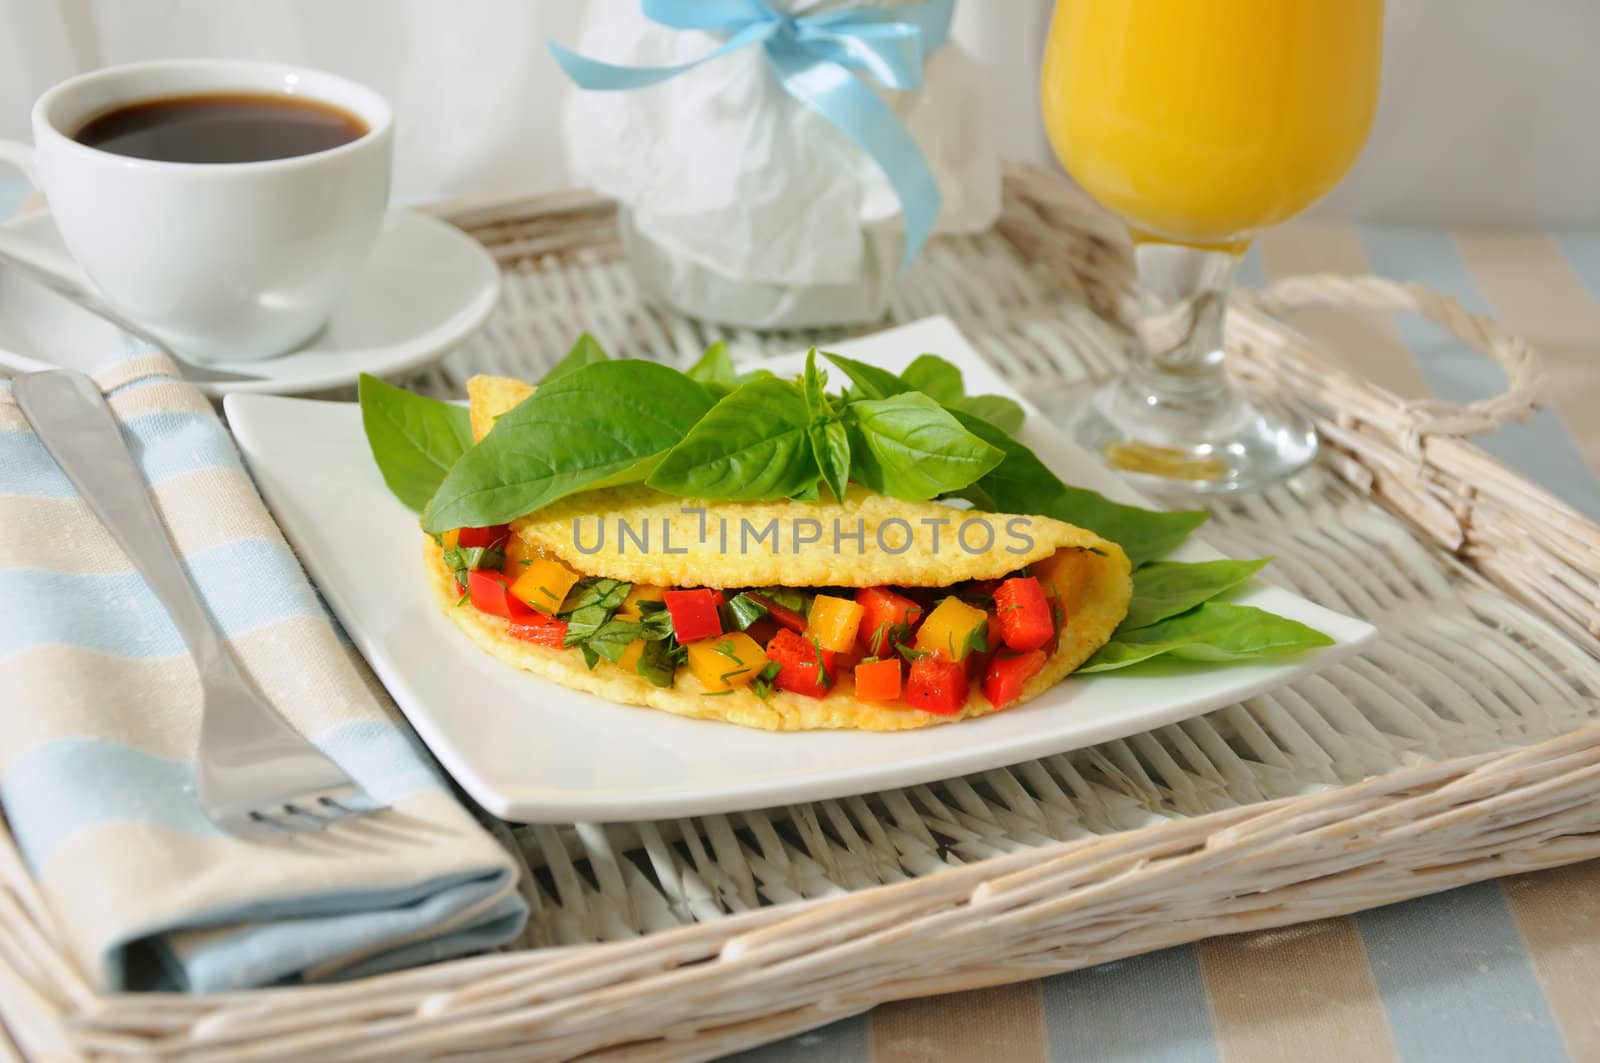 An omelet stuffed with vegetables with basil, orange juice on a tray